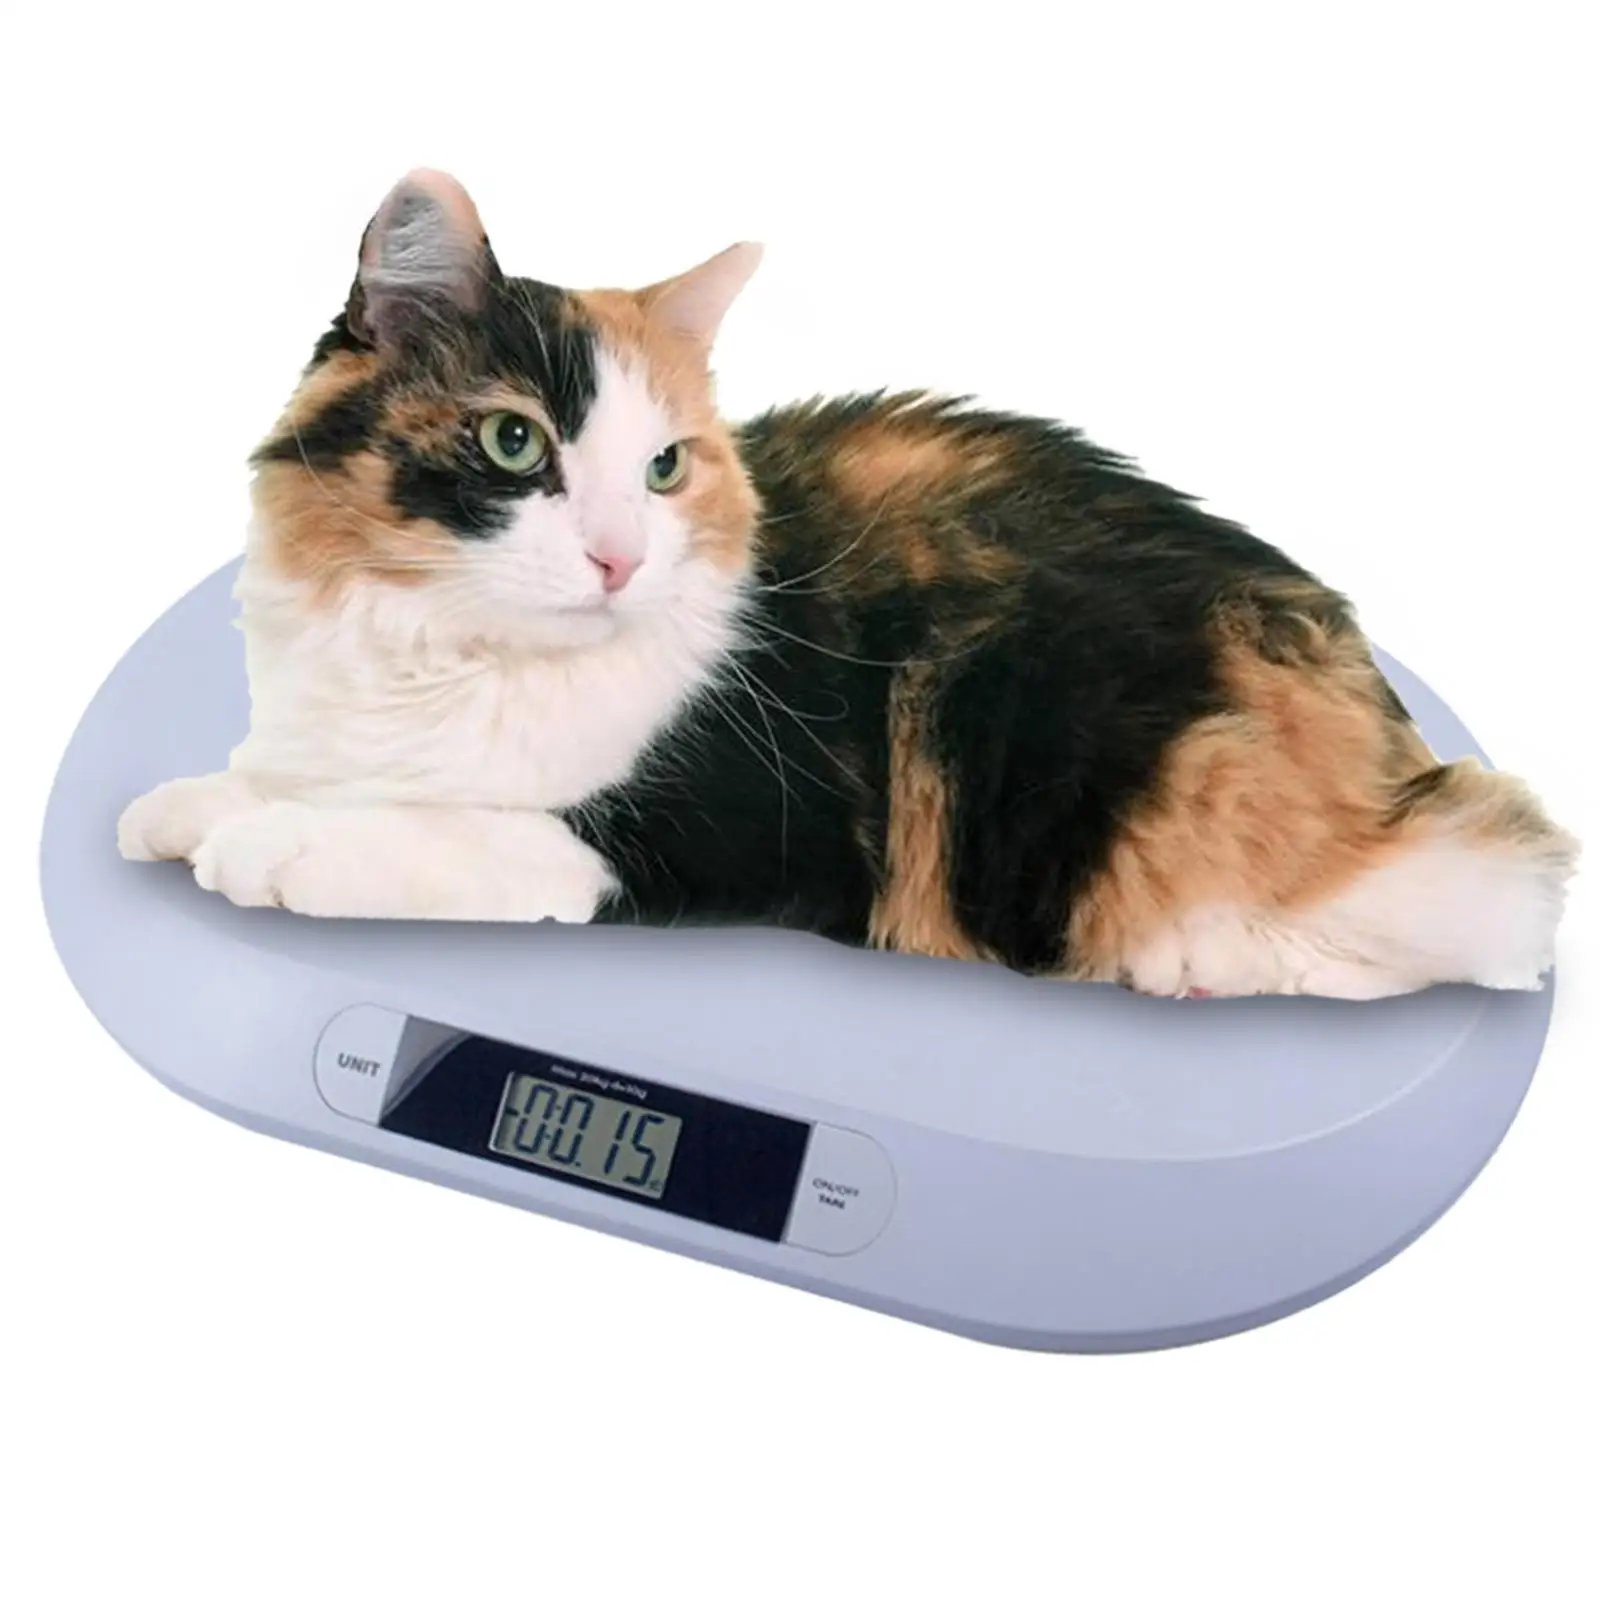 Infant Scale 44.1lb Capacity LCD Display Accurate  for Cats Newborns Infants